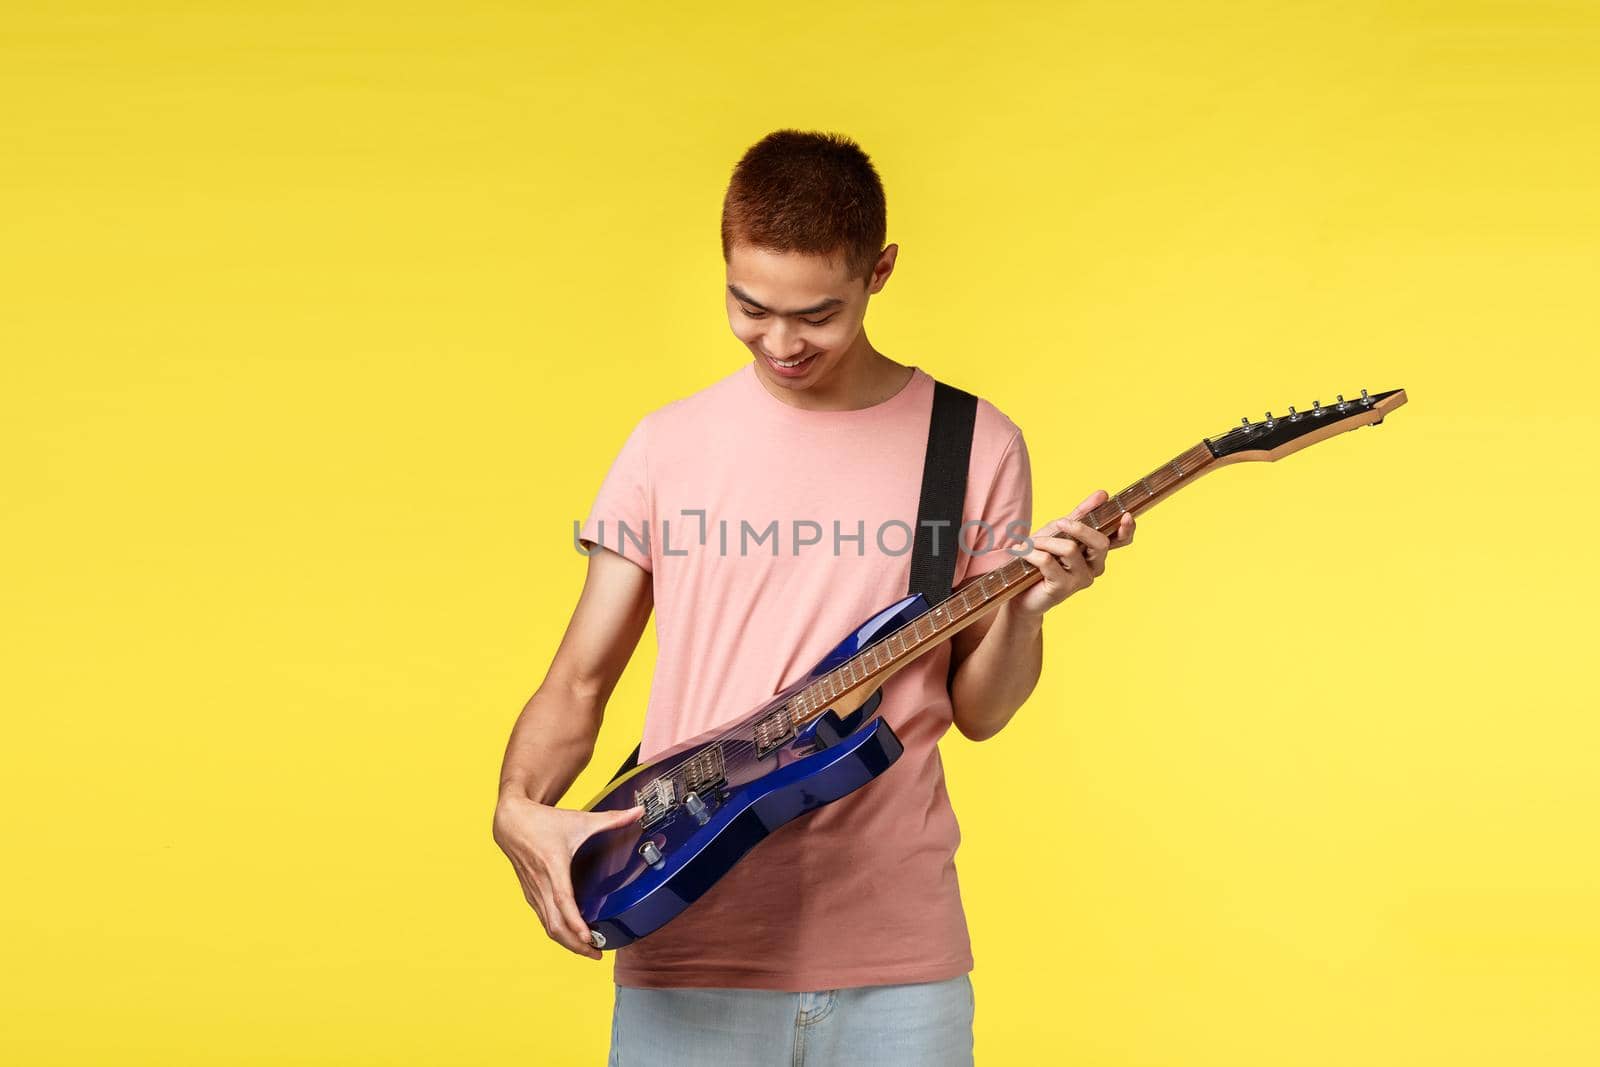 Lifestyle, leisure and youth concept. Portrait of enthusiastic asian guy receive new electric guitar as gift, smiling happy, look at intstrument satisfied and delighted, yellow background.